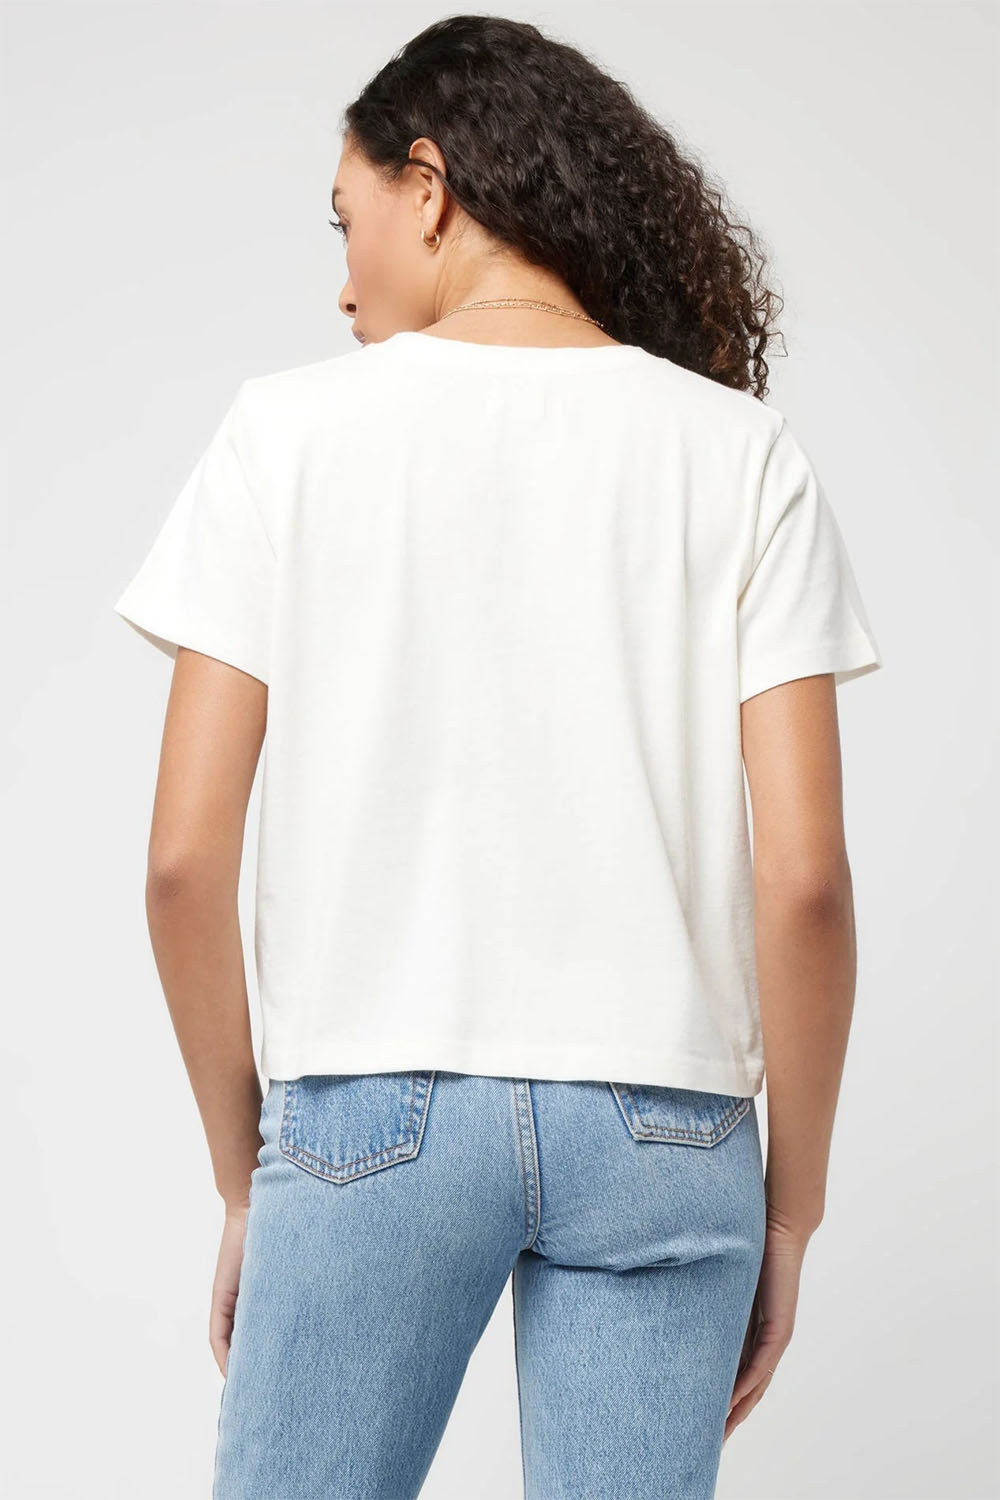 L*Space - All Day Top - Cream - Back